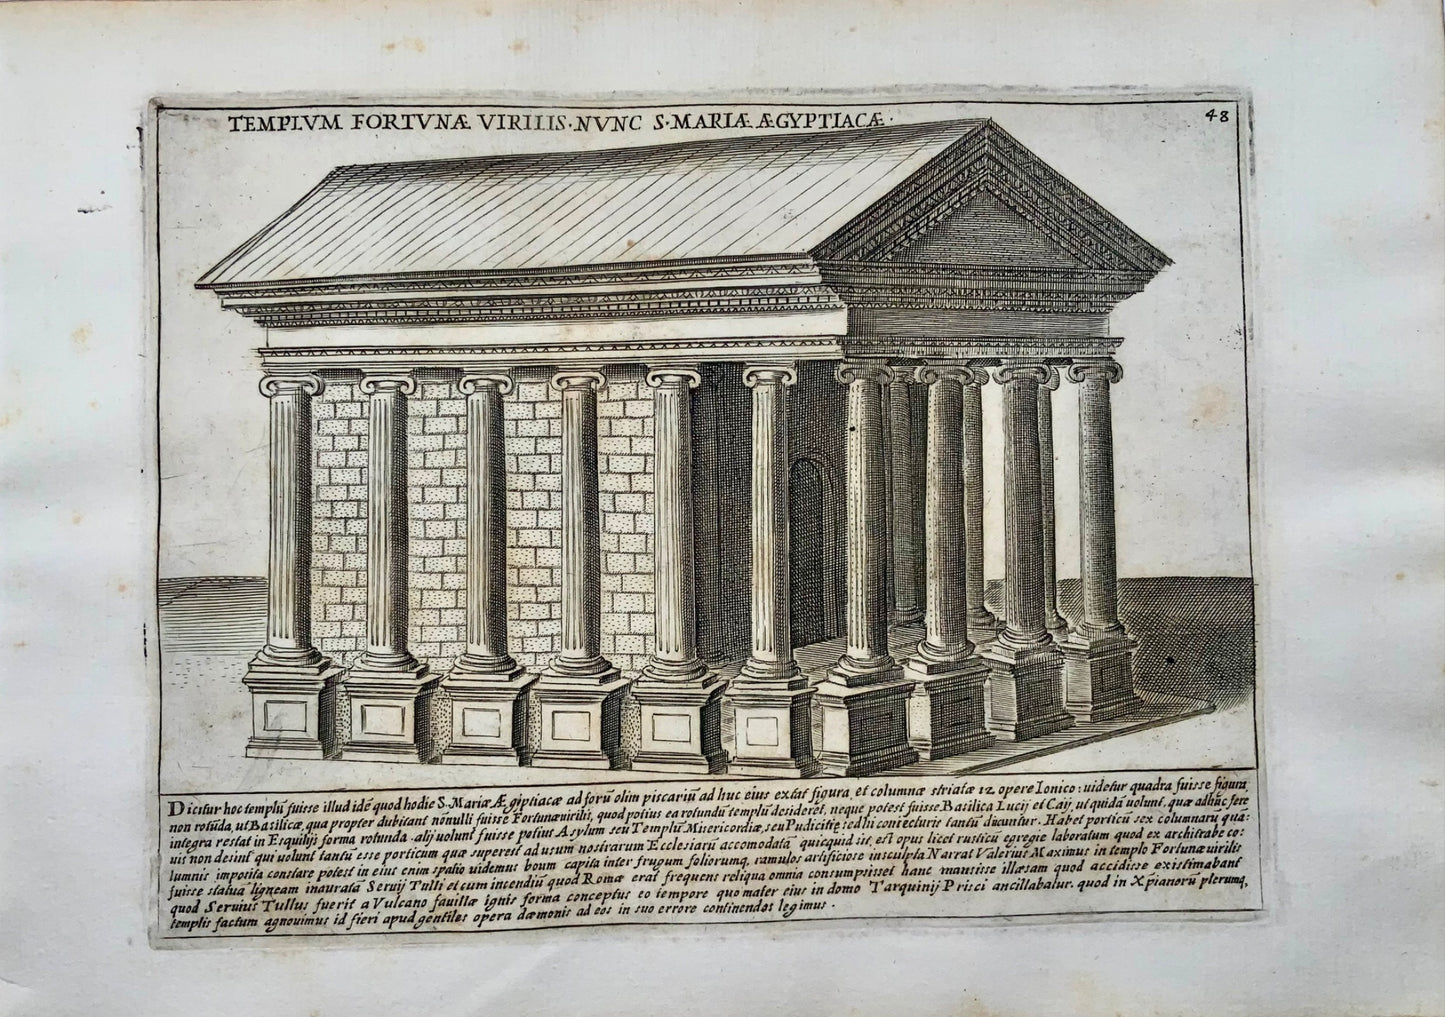 1623 The Temple of Portus, Rome, Italy, engraving by Gia Lauro, antique original